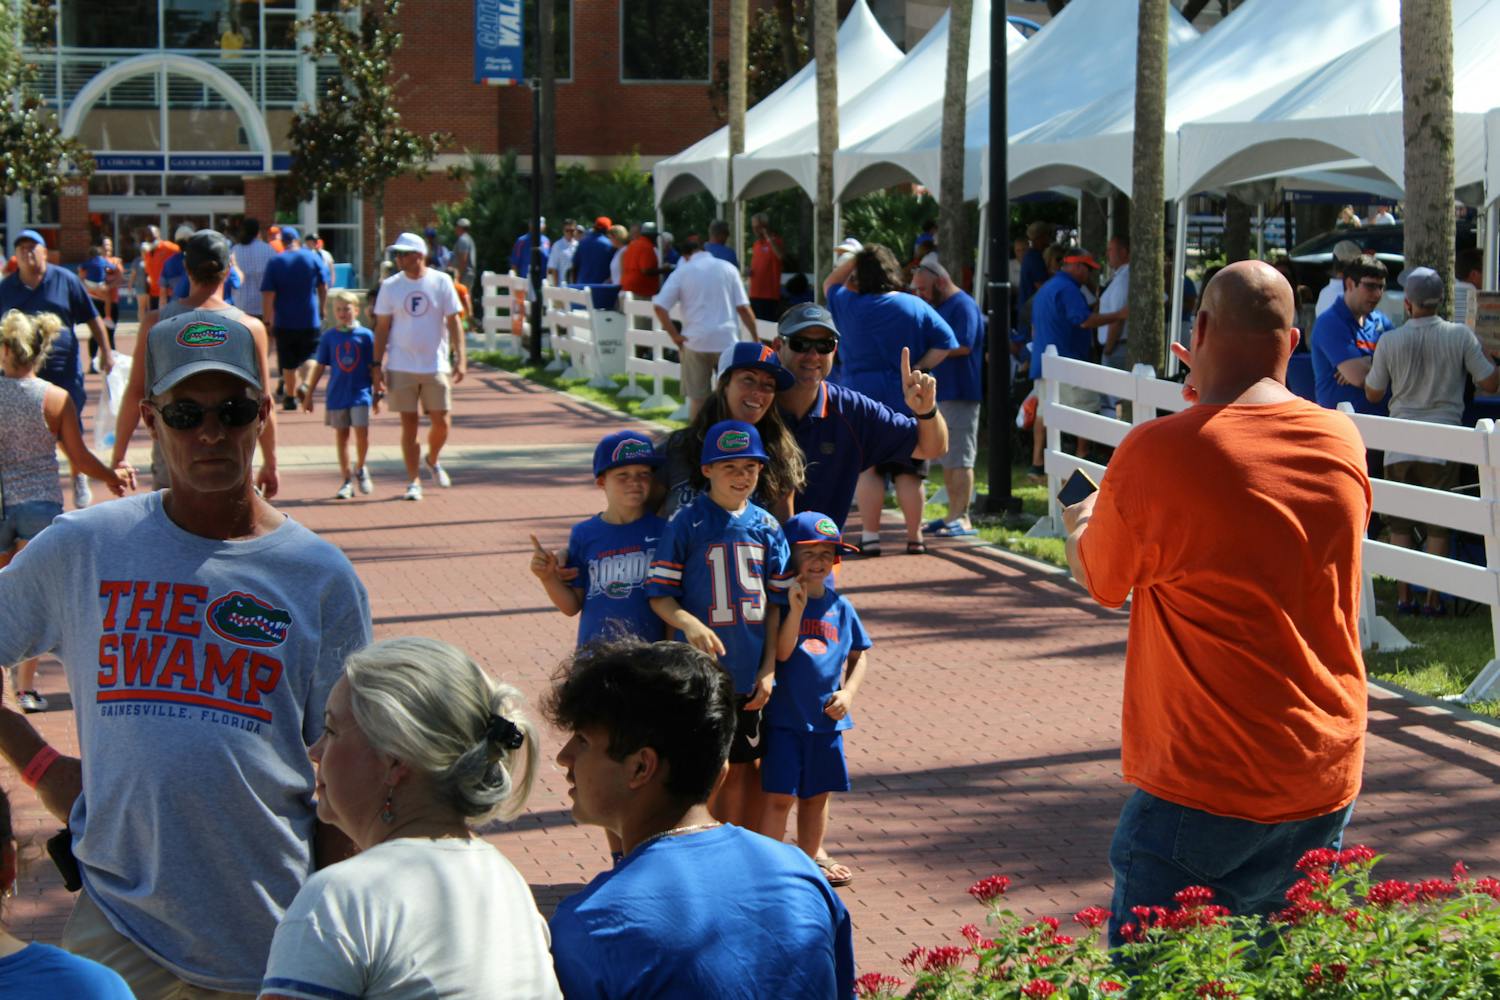 A family of Florida fans takes a picture during a pre-game tailgate in front of Ben Hill Griffin Stadium on Sept. 4.